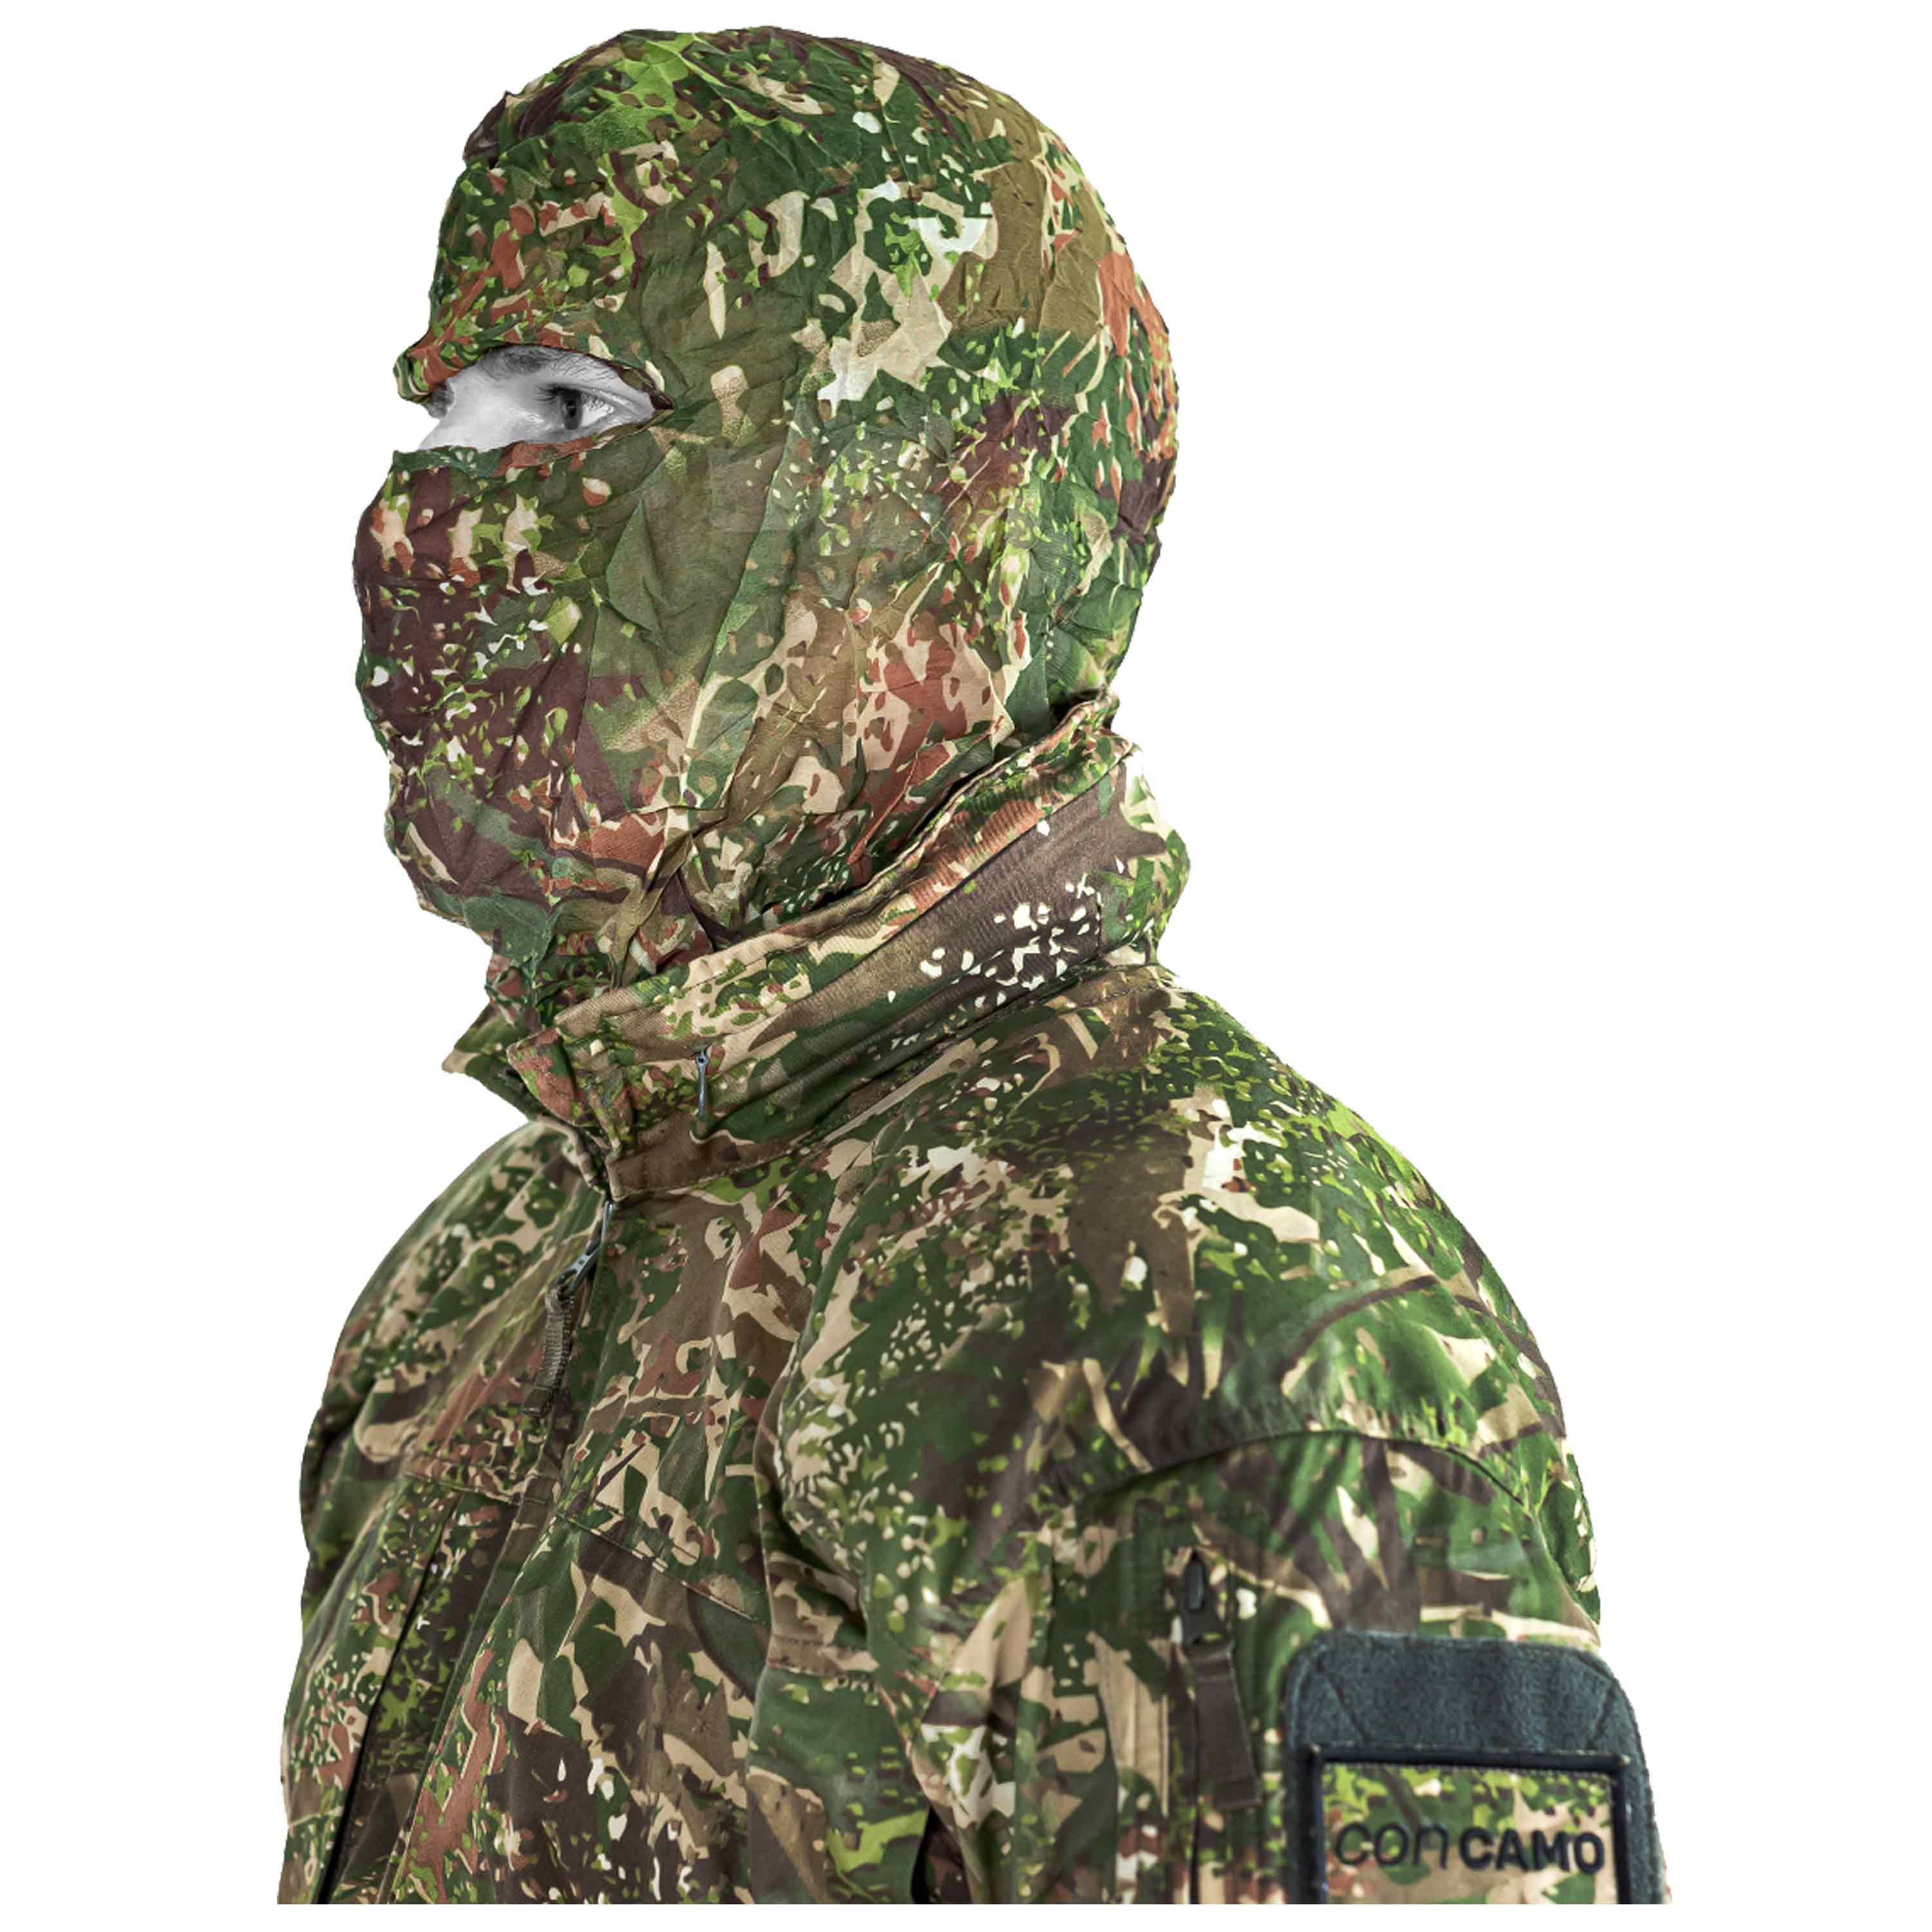 Purchase the Ghosthood Ghost-Mask concamo green by ASMC